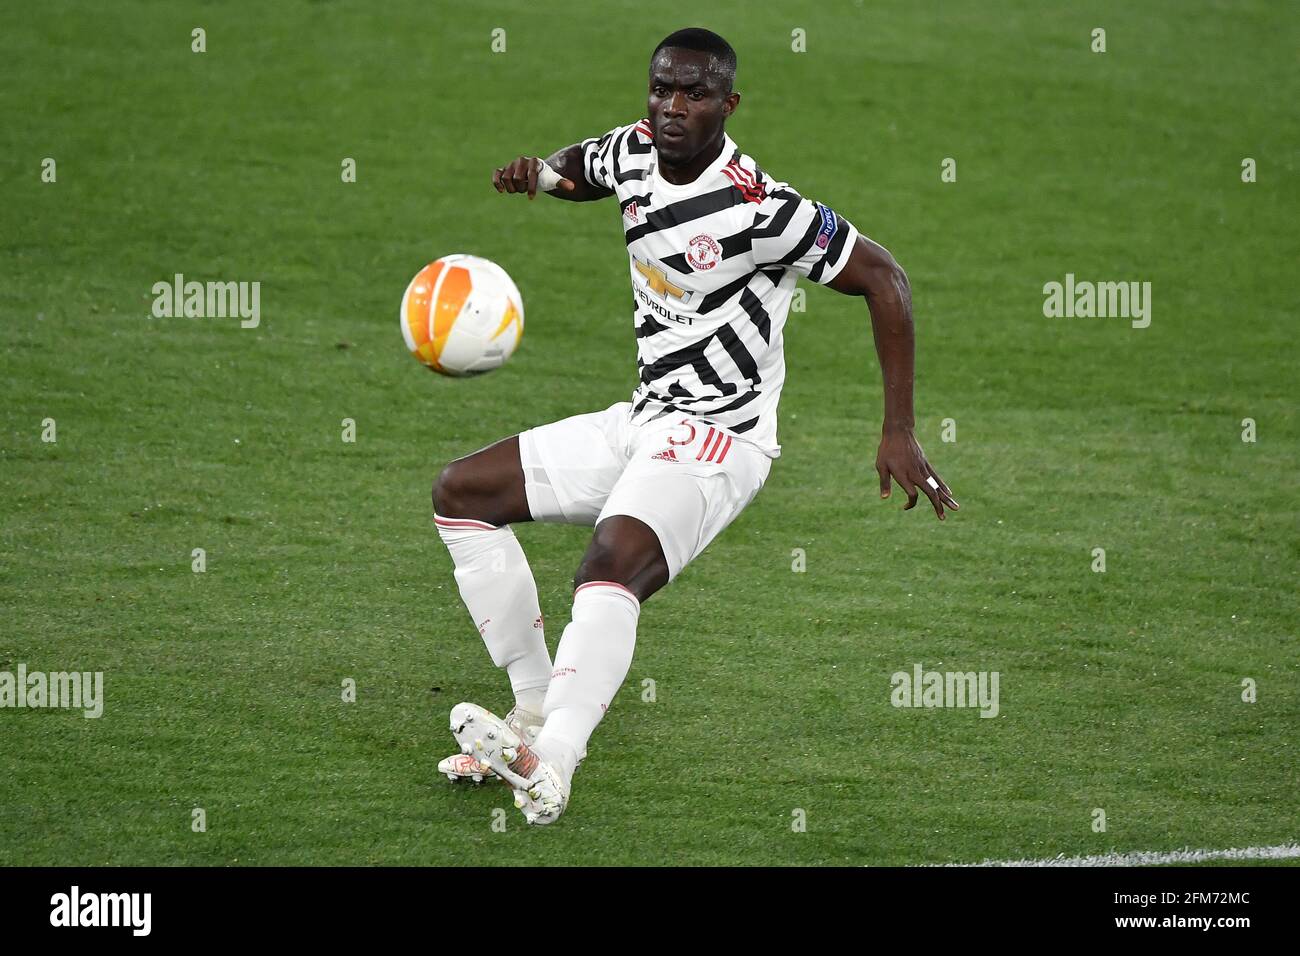 Rome, Italy. 06th May, 2021. Eric Bailly of Manchester United in action during the Europa League semi-finals 2nd leg football match between AS Roma and Manchester United at stadio Olimpico in Rome (Italy), May, 6th, 2021. Photo Antonietta Baldassarre/Insidefoto Credit: insidefoto srl/Alamy Live News Stock Photo